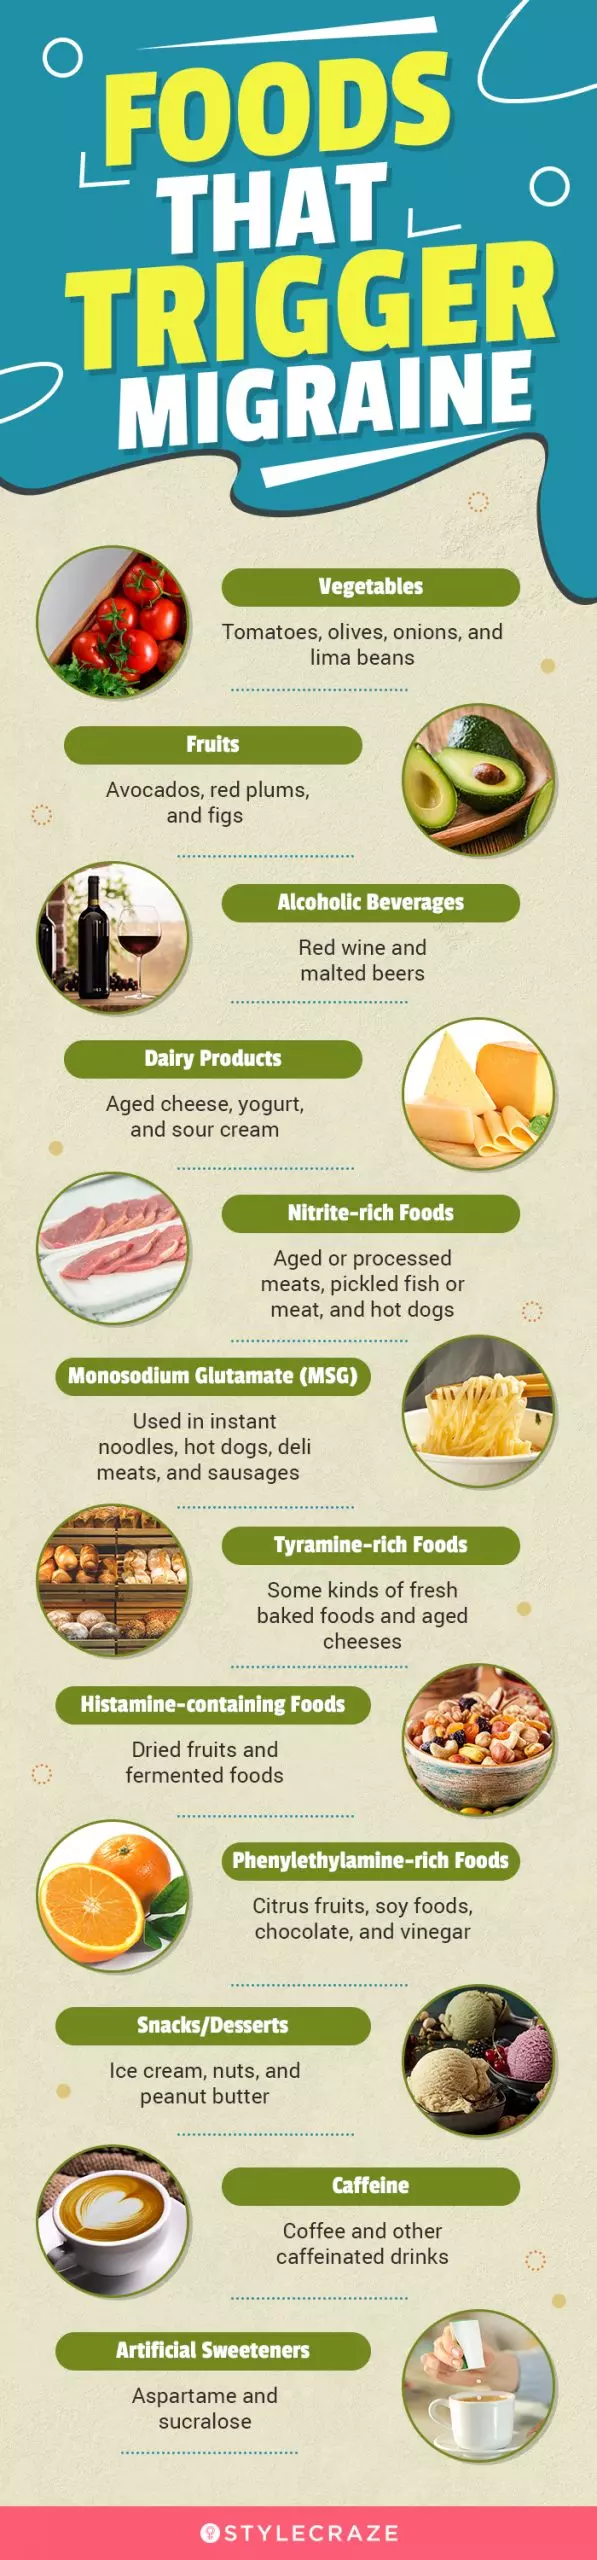 foods that trigger migraine (infographic)